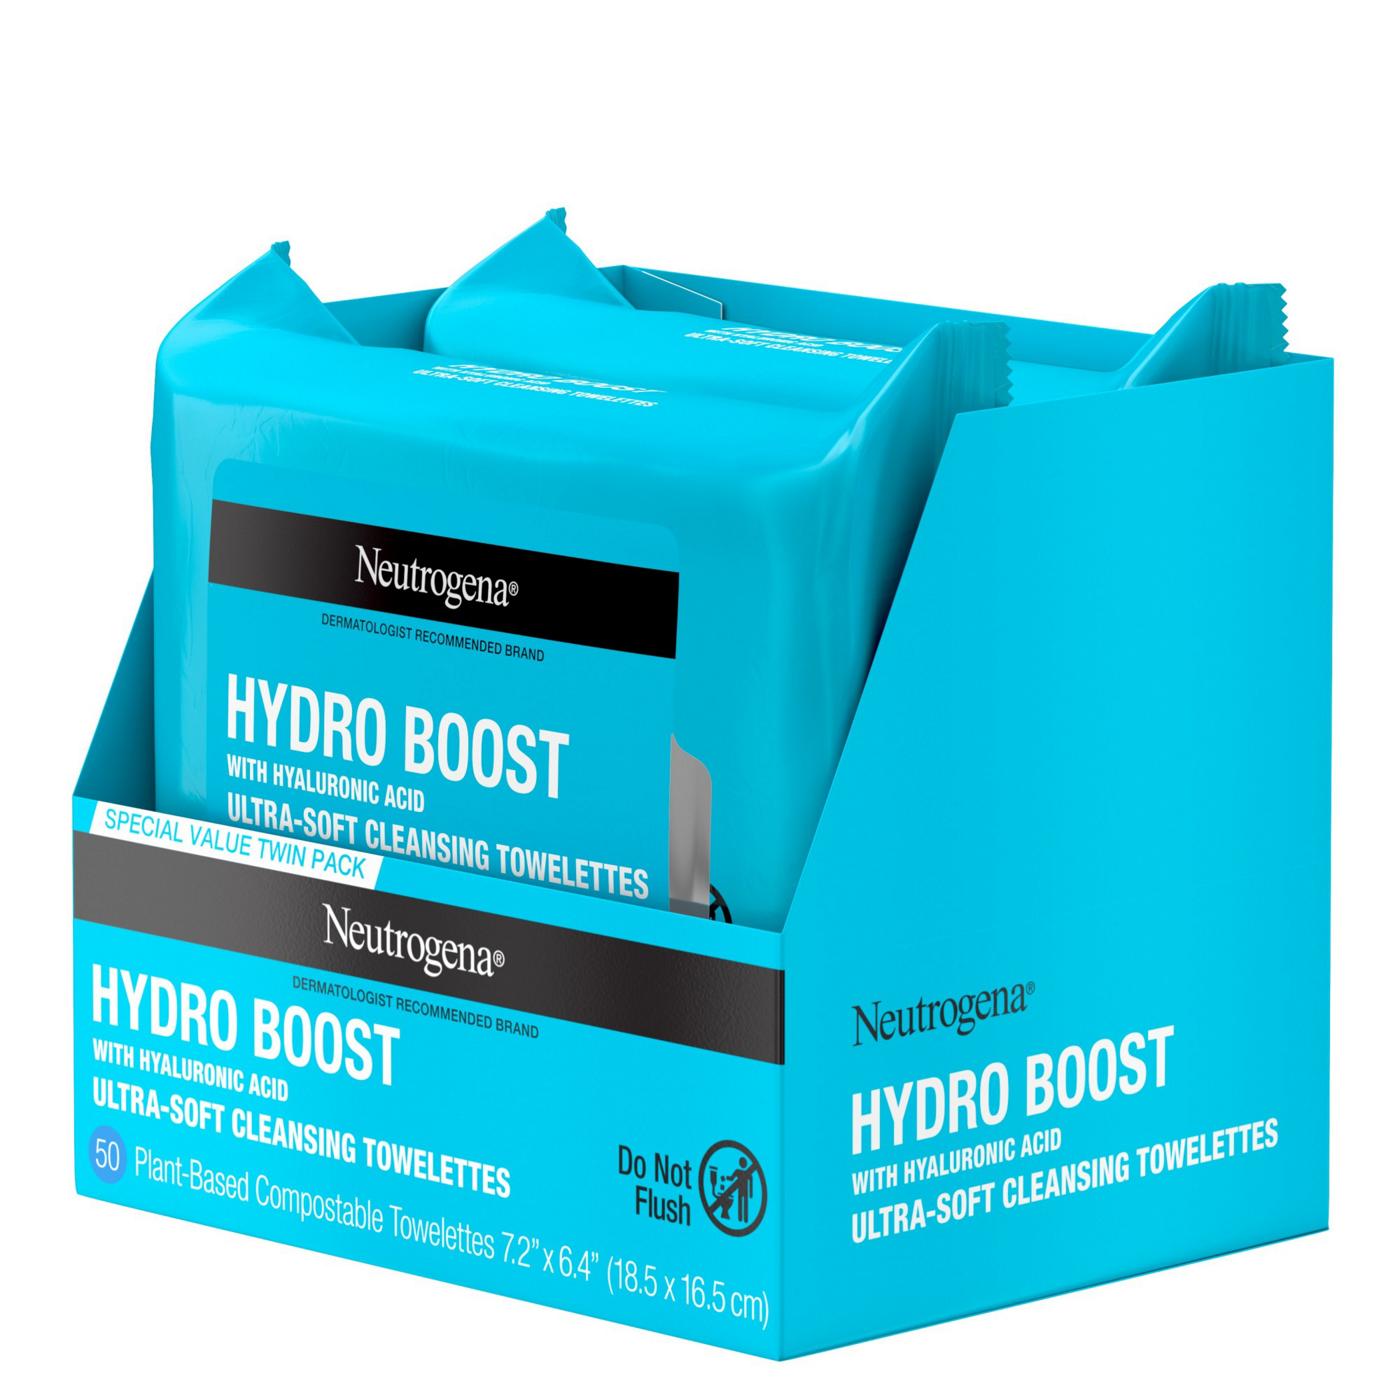 Neutrogena Hydro Boost Facial Cleansing Wipes - Twin Pack; image 6 of 7